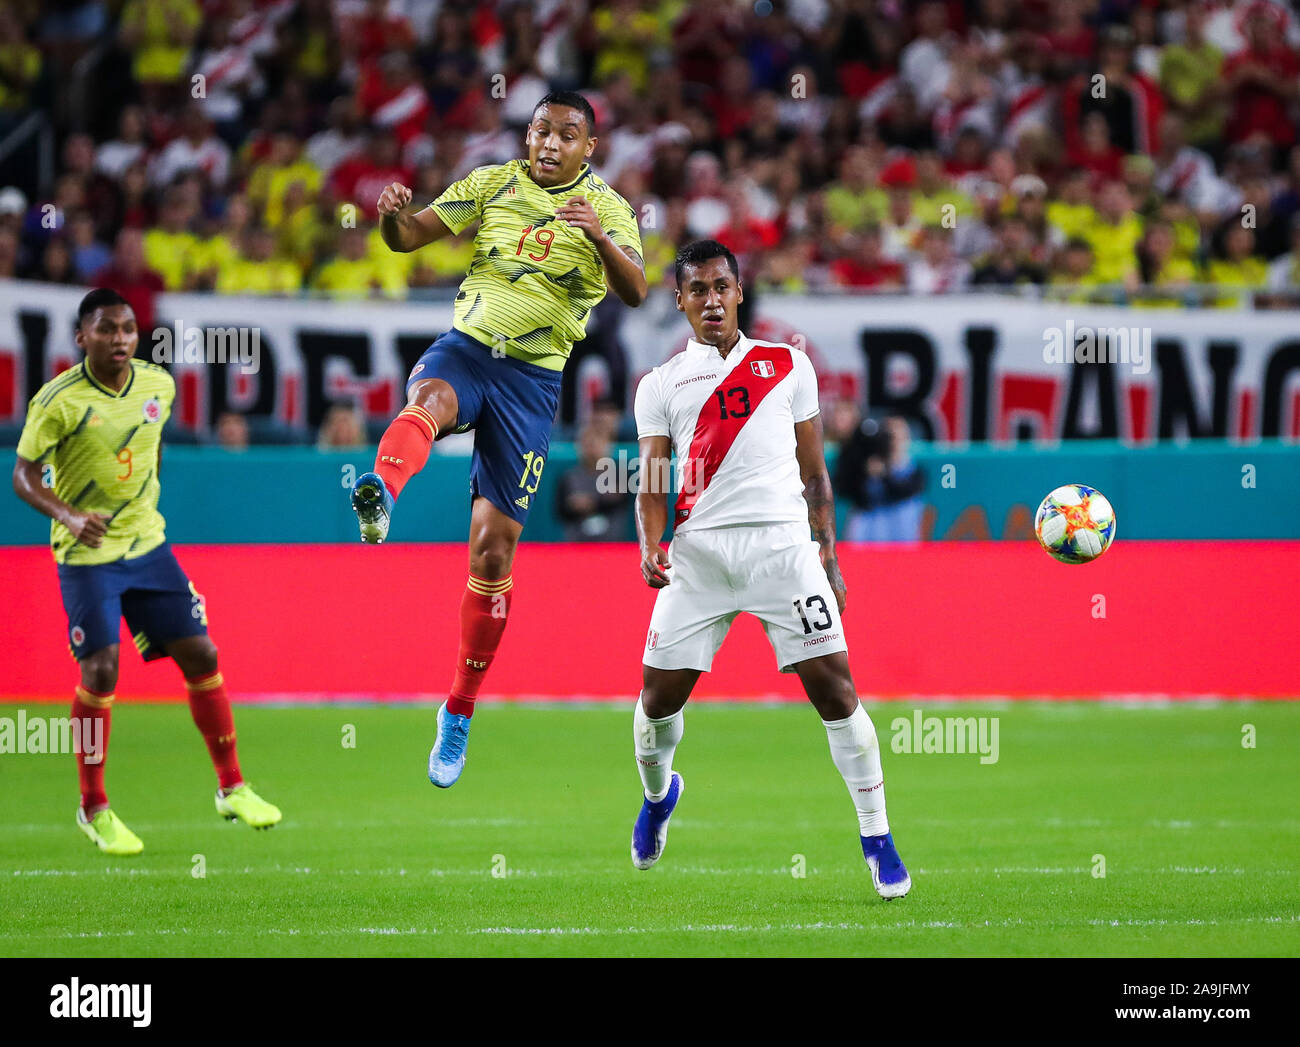 Miami Gardens, Florida, USA. 15th Nov, 2019. Colombia forward Luis Muriel (19) passes the ball with a header over Peru midfielder Renato Tapia (13) during a friendly soccer match at the Hard Rock Stadium in Miami Gardens, Florida. Credit: Mario Houben/ZUMA Wire/Alamy Live News Stock Photo